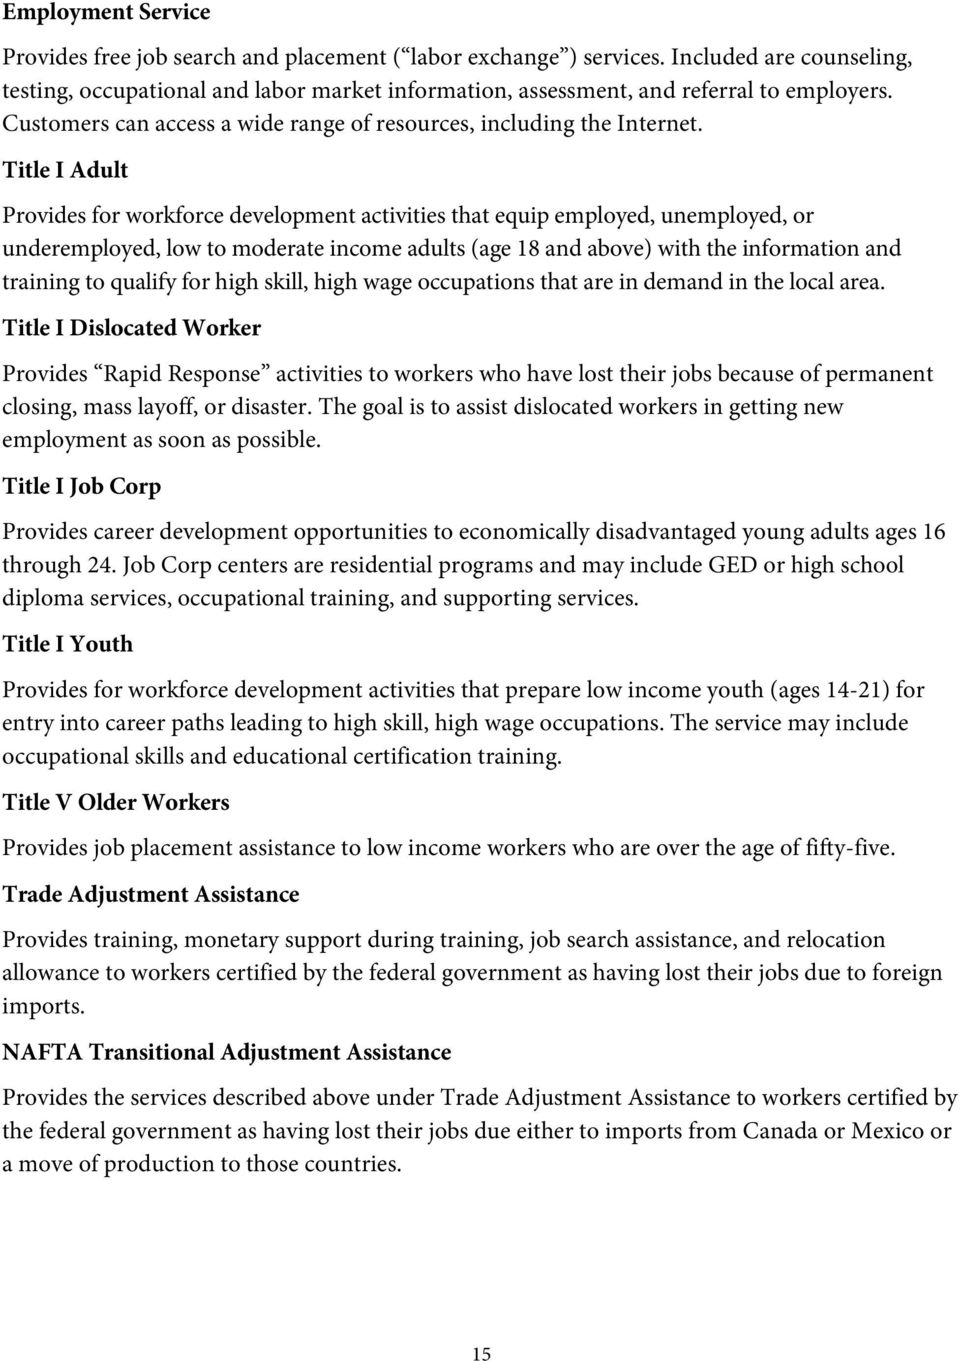 Title I Adult Provides for workforce development activities that equip employed, unemployed, or underemployed, low to moderate income adults (age 18 and above) with the information and training to